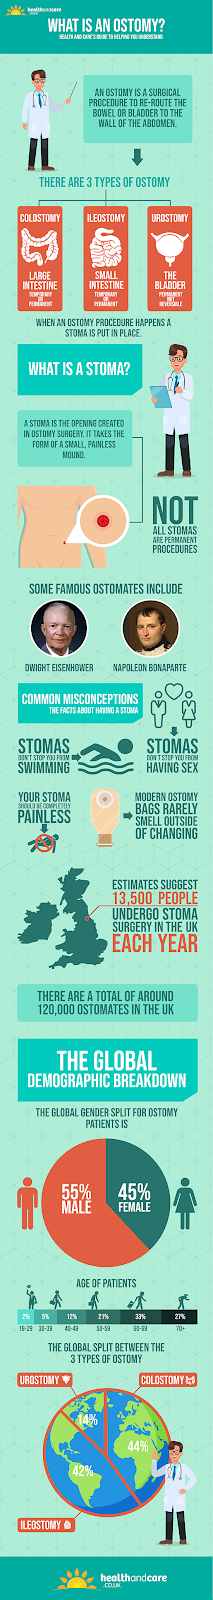 What is Ostomy